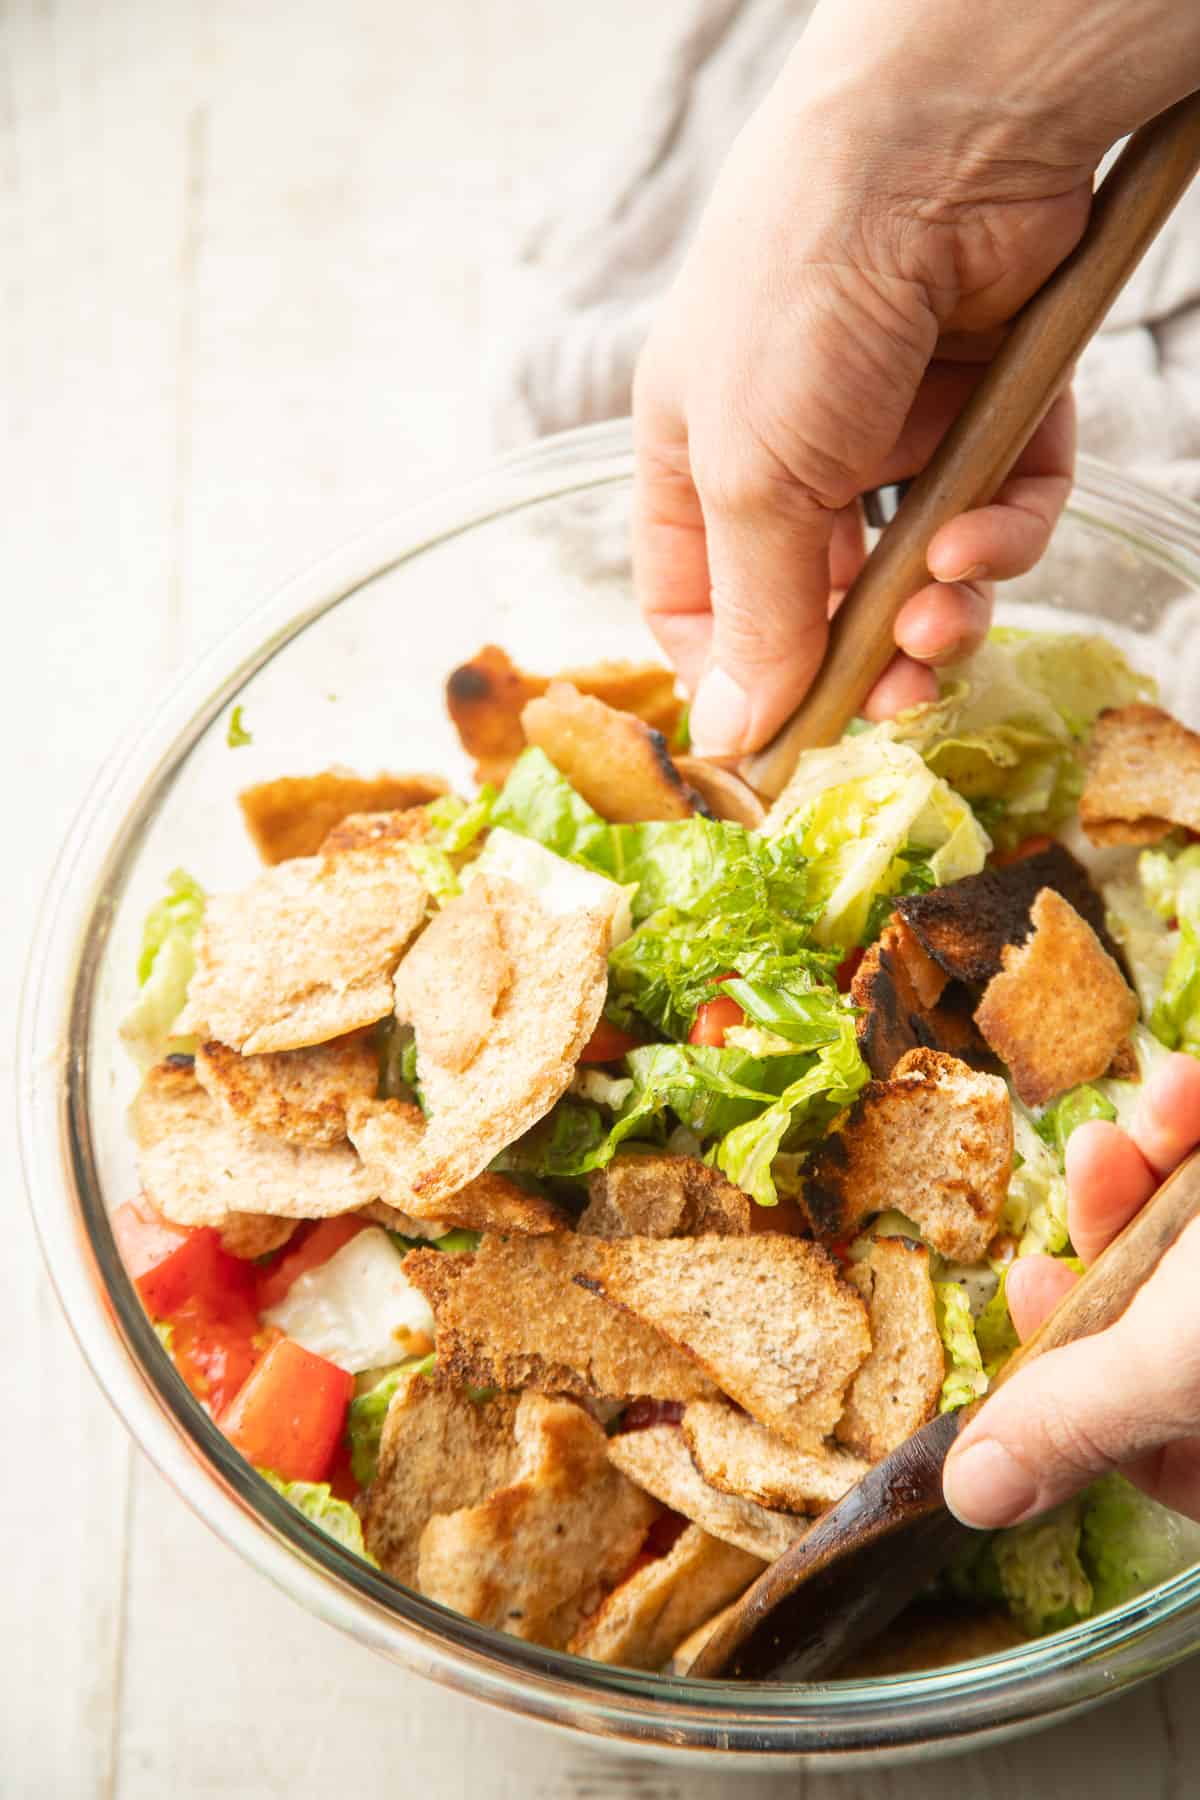 Hand stirring Fattoush Salad together in a mixing bowl.